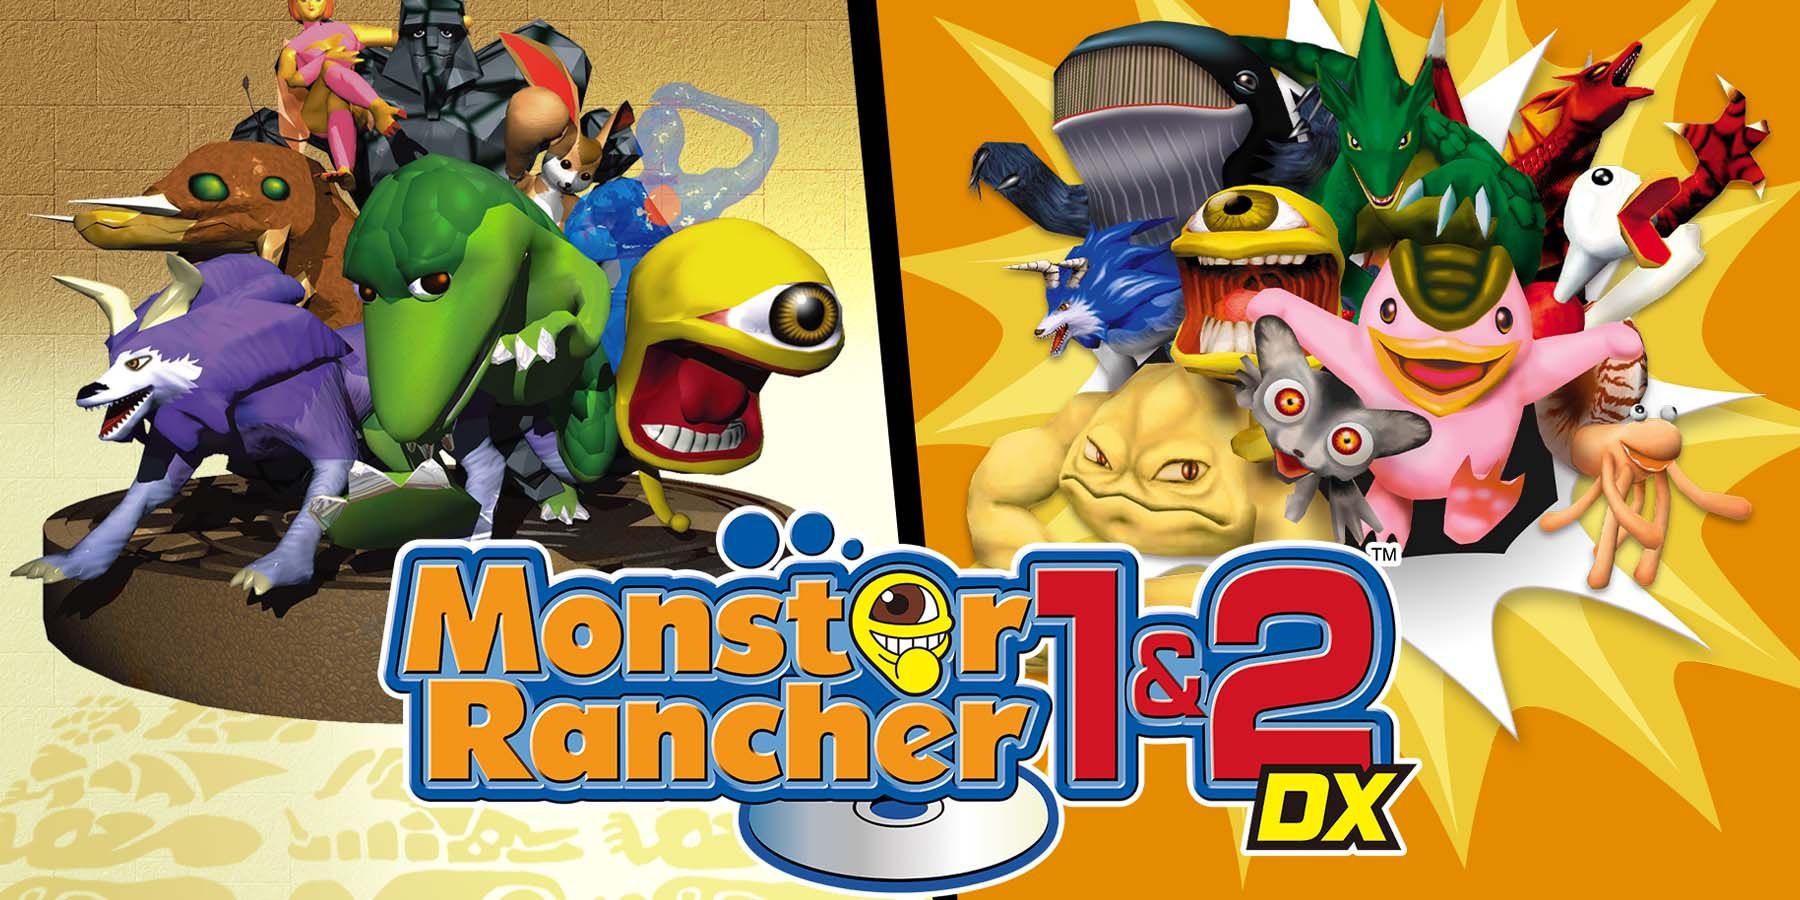 Monster Rancher 1 & 2 DX covers